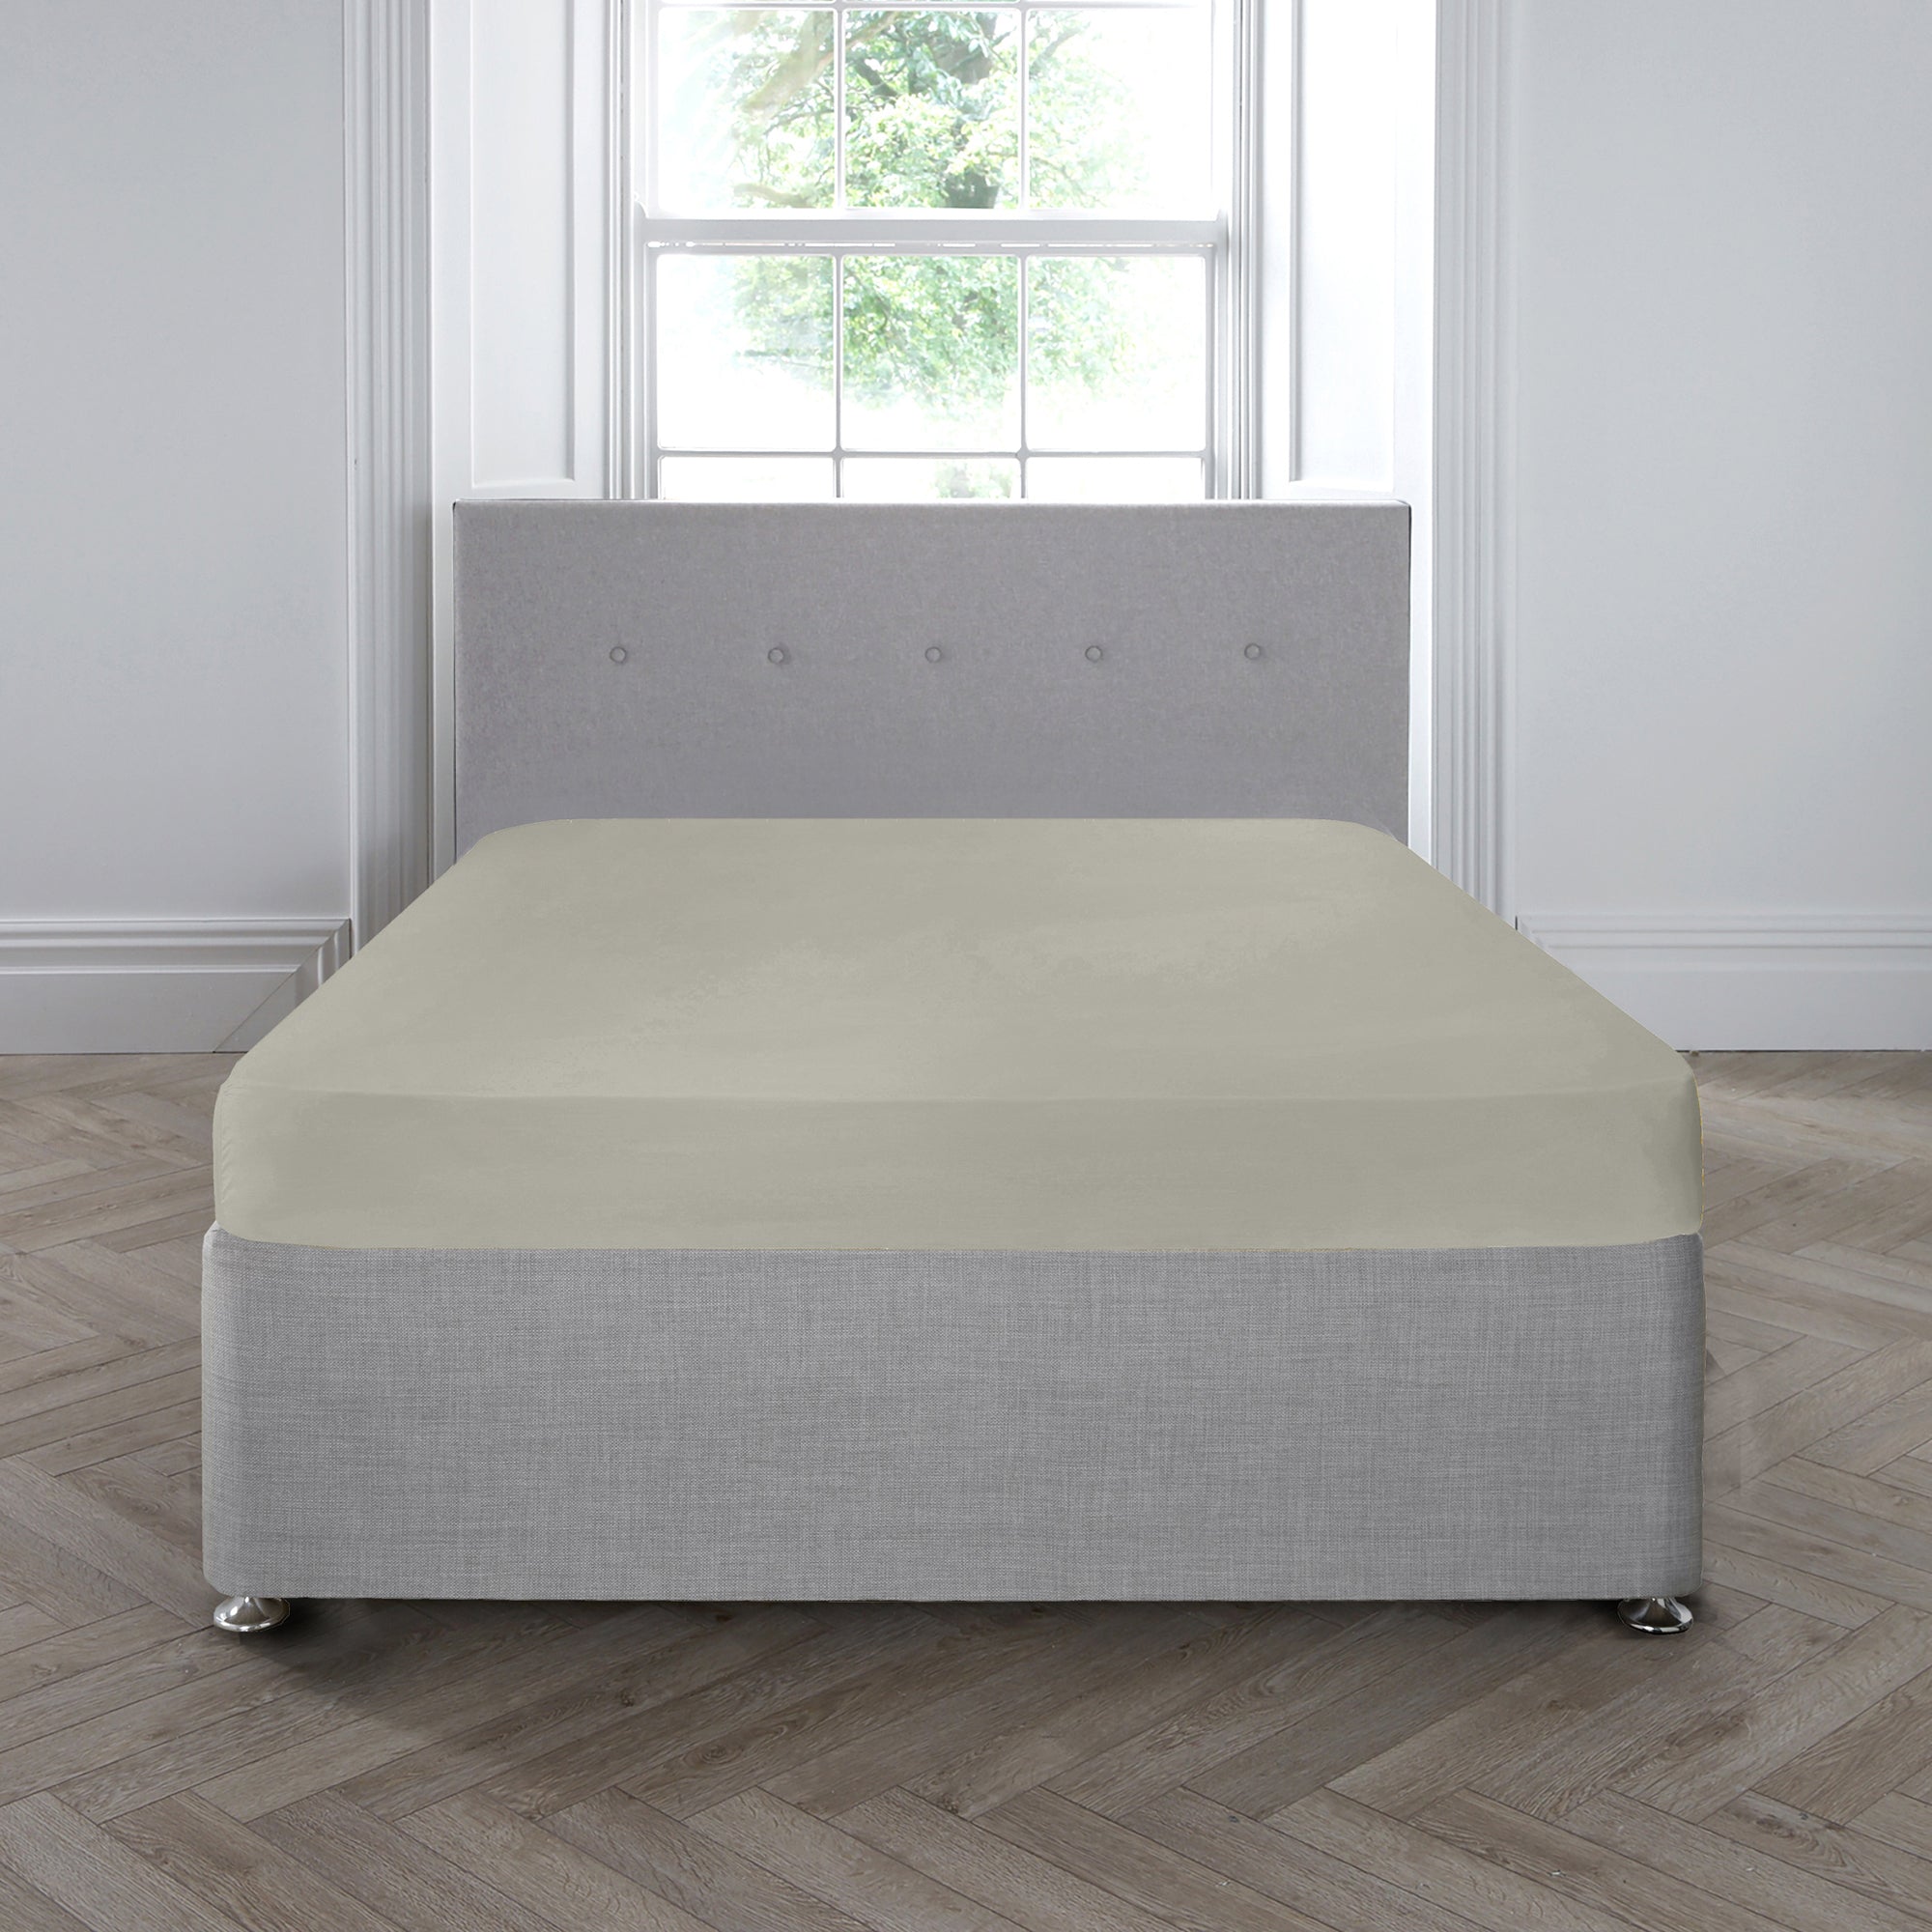 200TC Plain Dye 35cm Deep Fitted Sheet by Appletree Boutique in Silver - 35cm Deep Fitted Sheet - Appletree Boutique